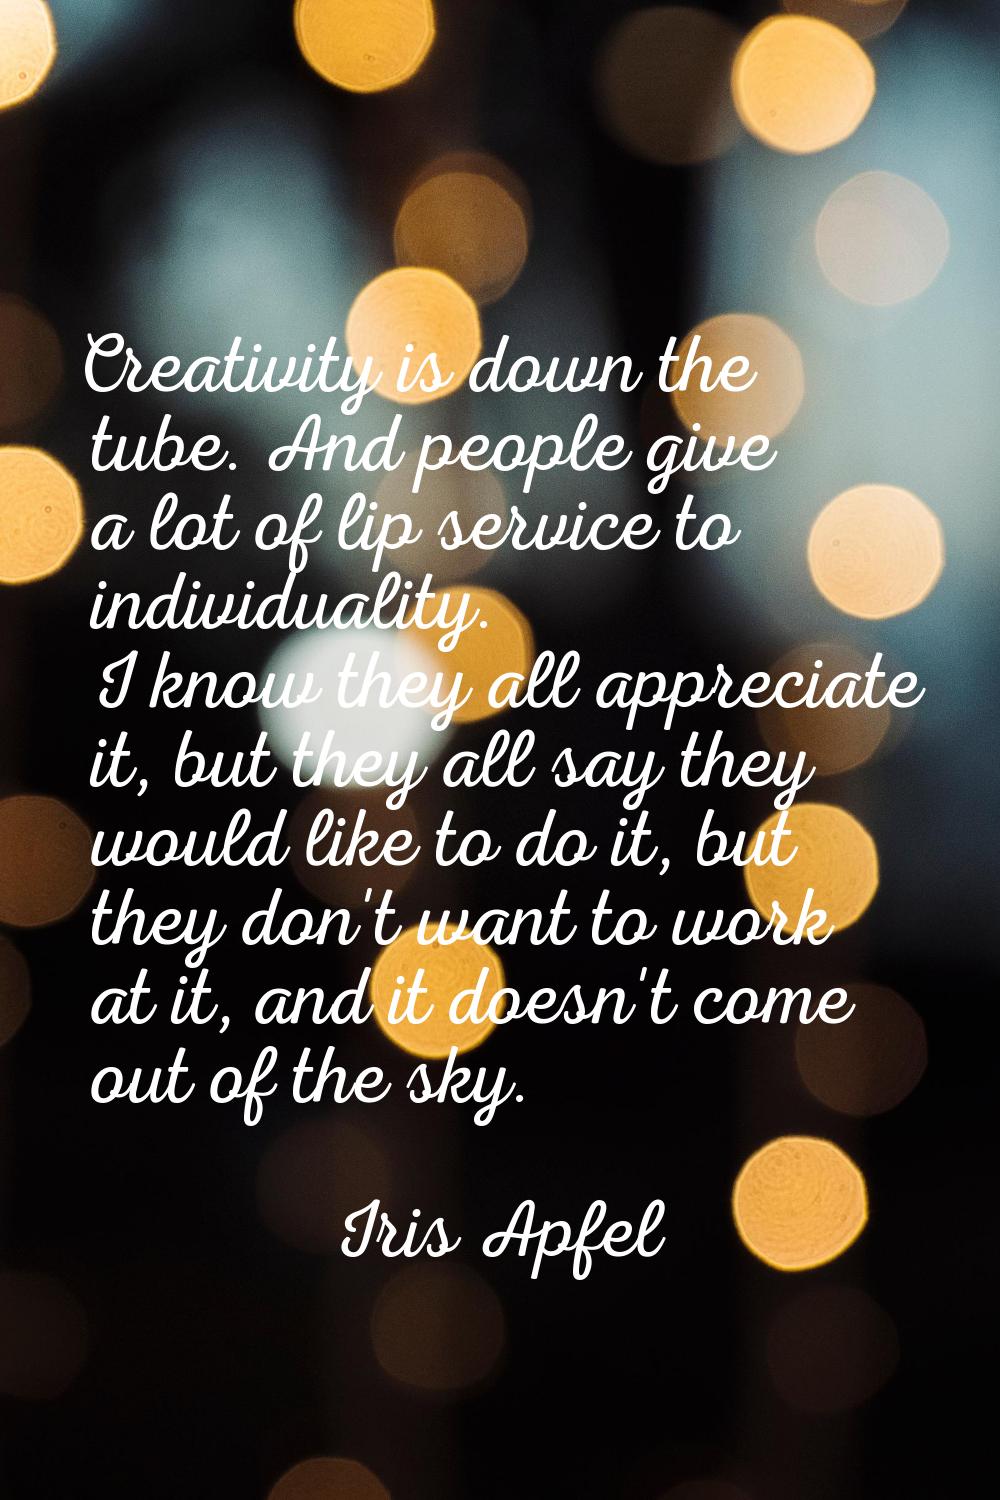 Creativity is down the tube. And people give a lot of lip service to individuality. I know they all